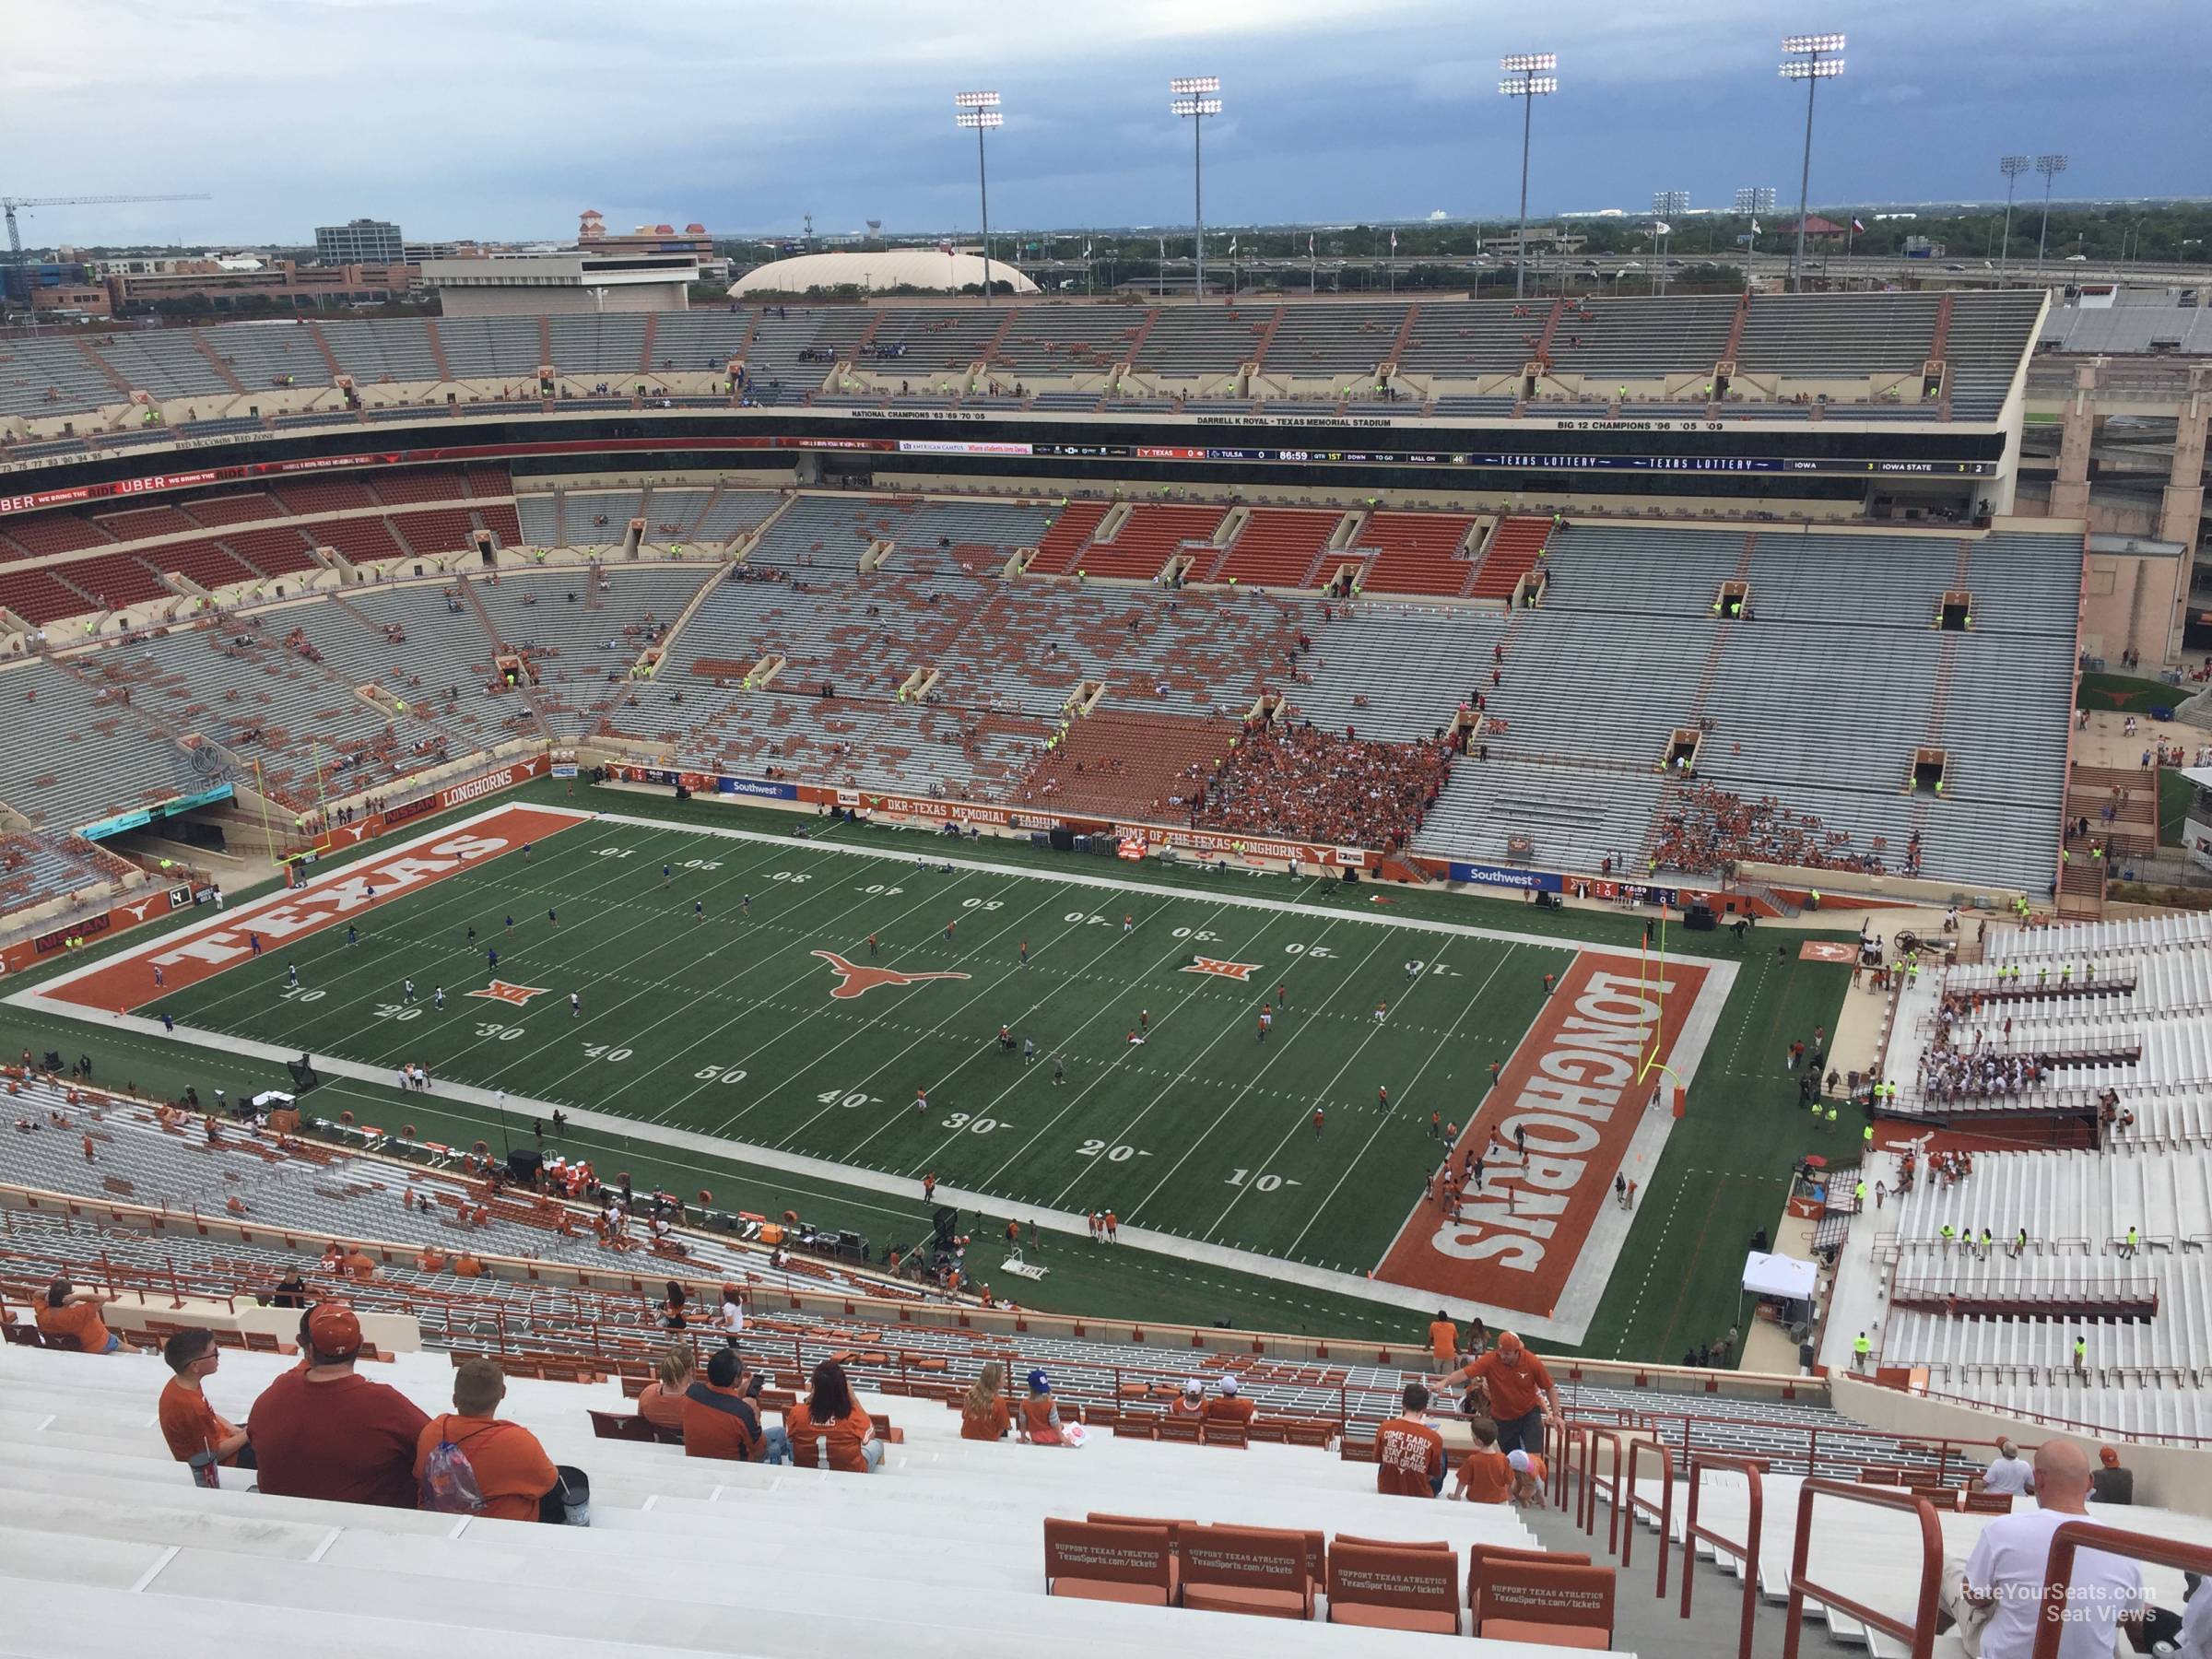 section 101, row 50 seat view  - dkr-texas memorial stadium